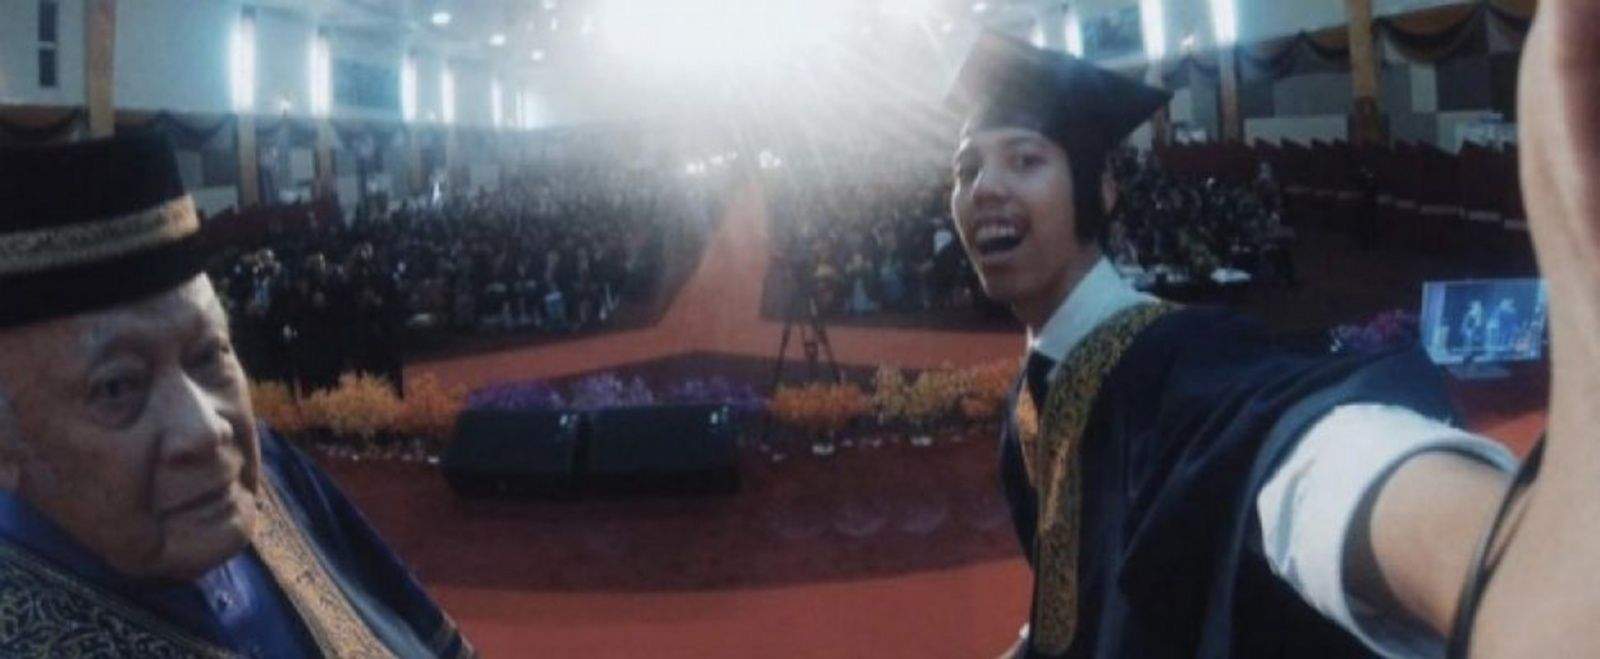 This selfie during a recent graduation in Malaysia earned the student a suspension from the university.